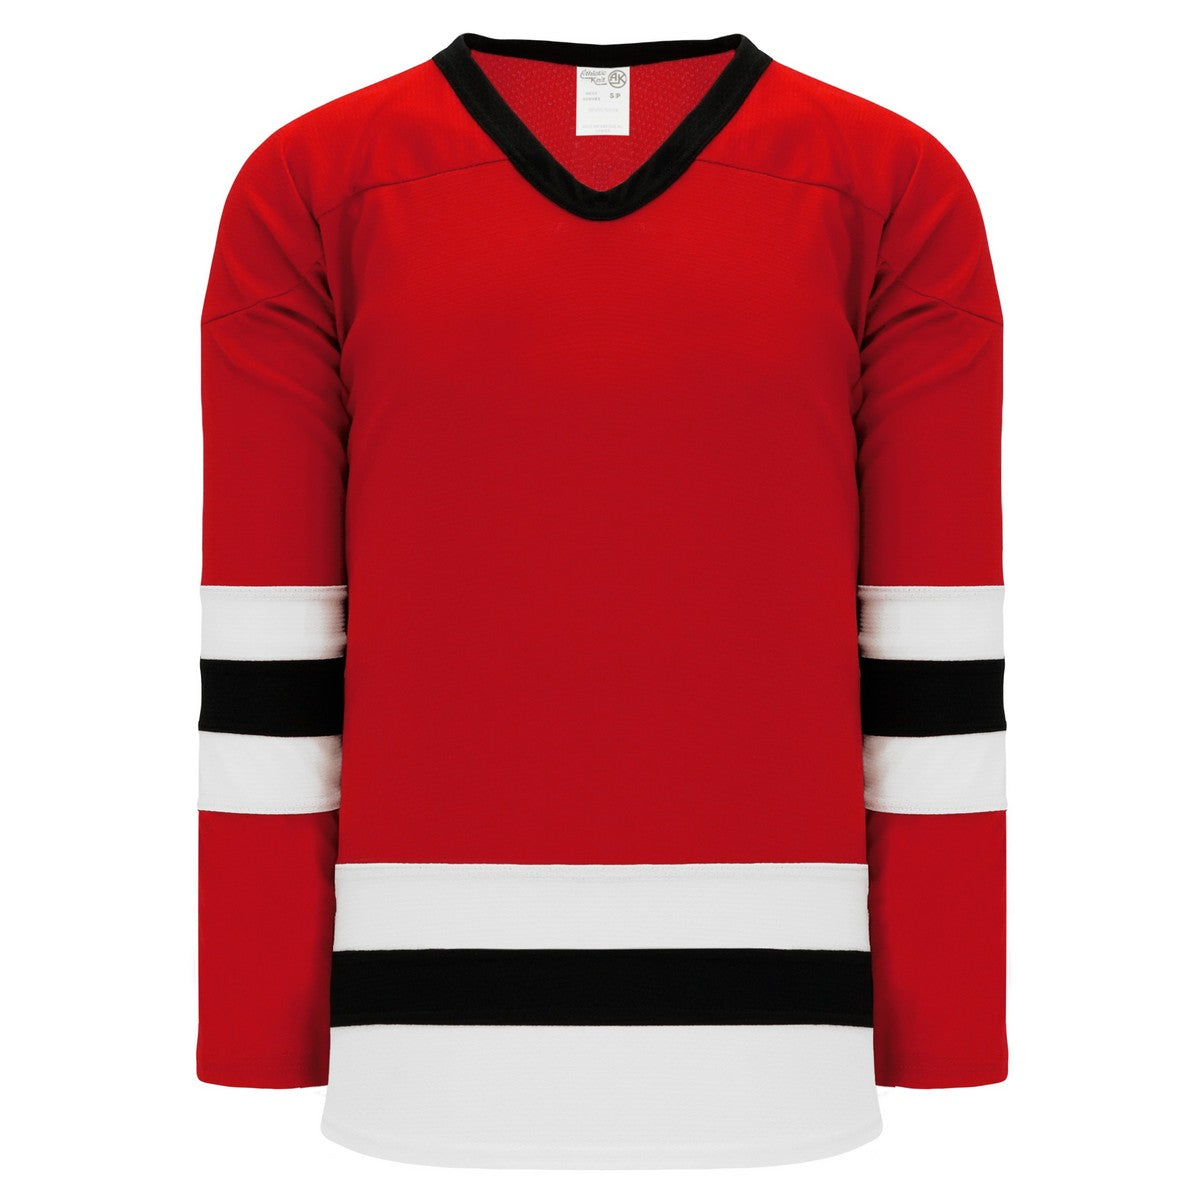 League Series H6500 Jersey Red-Black